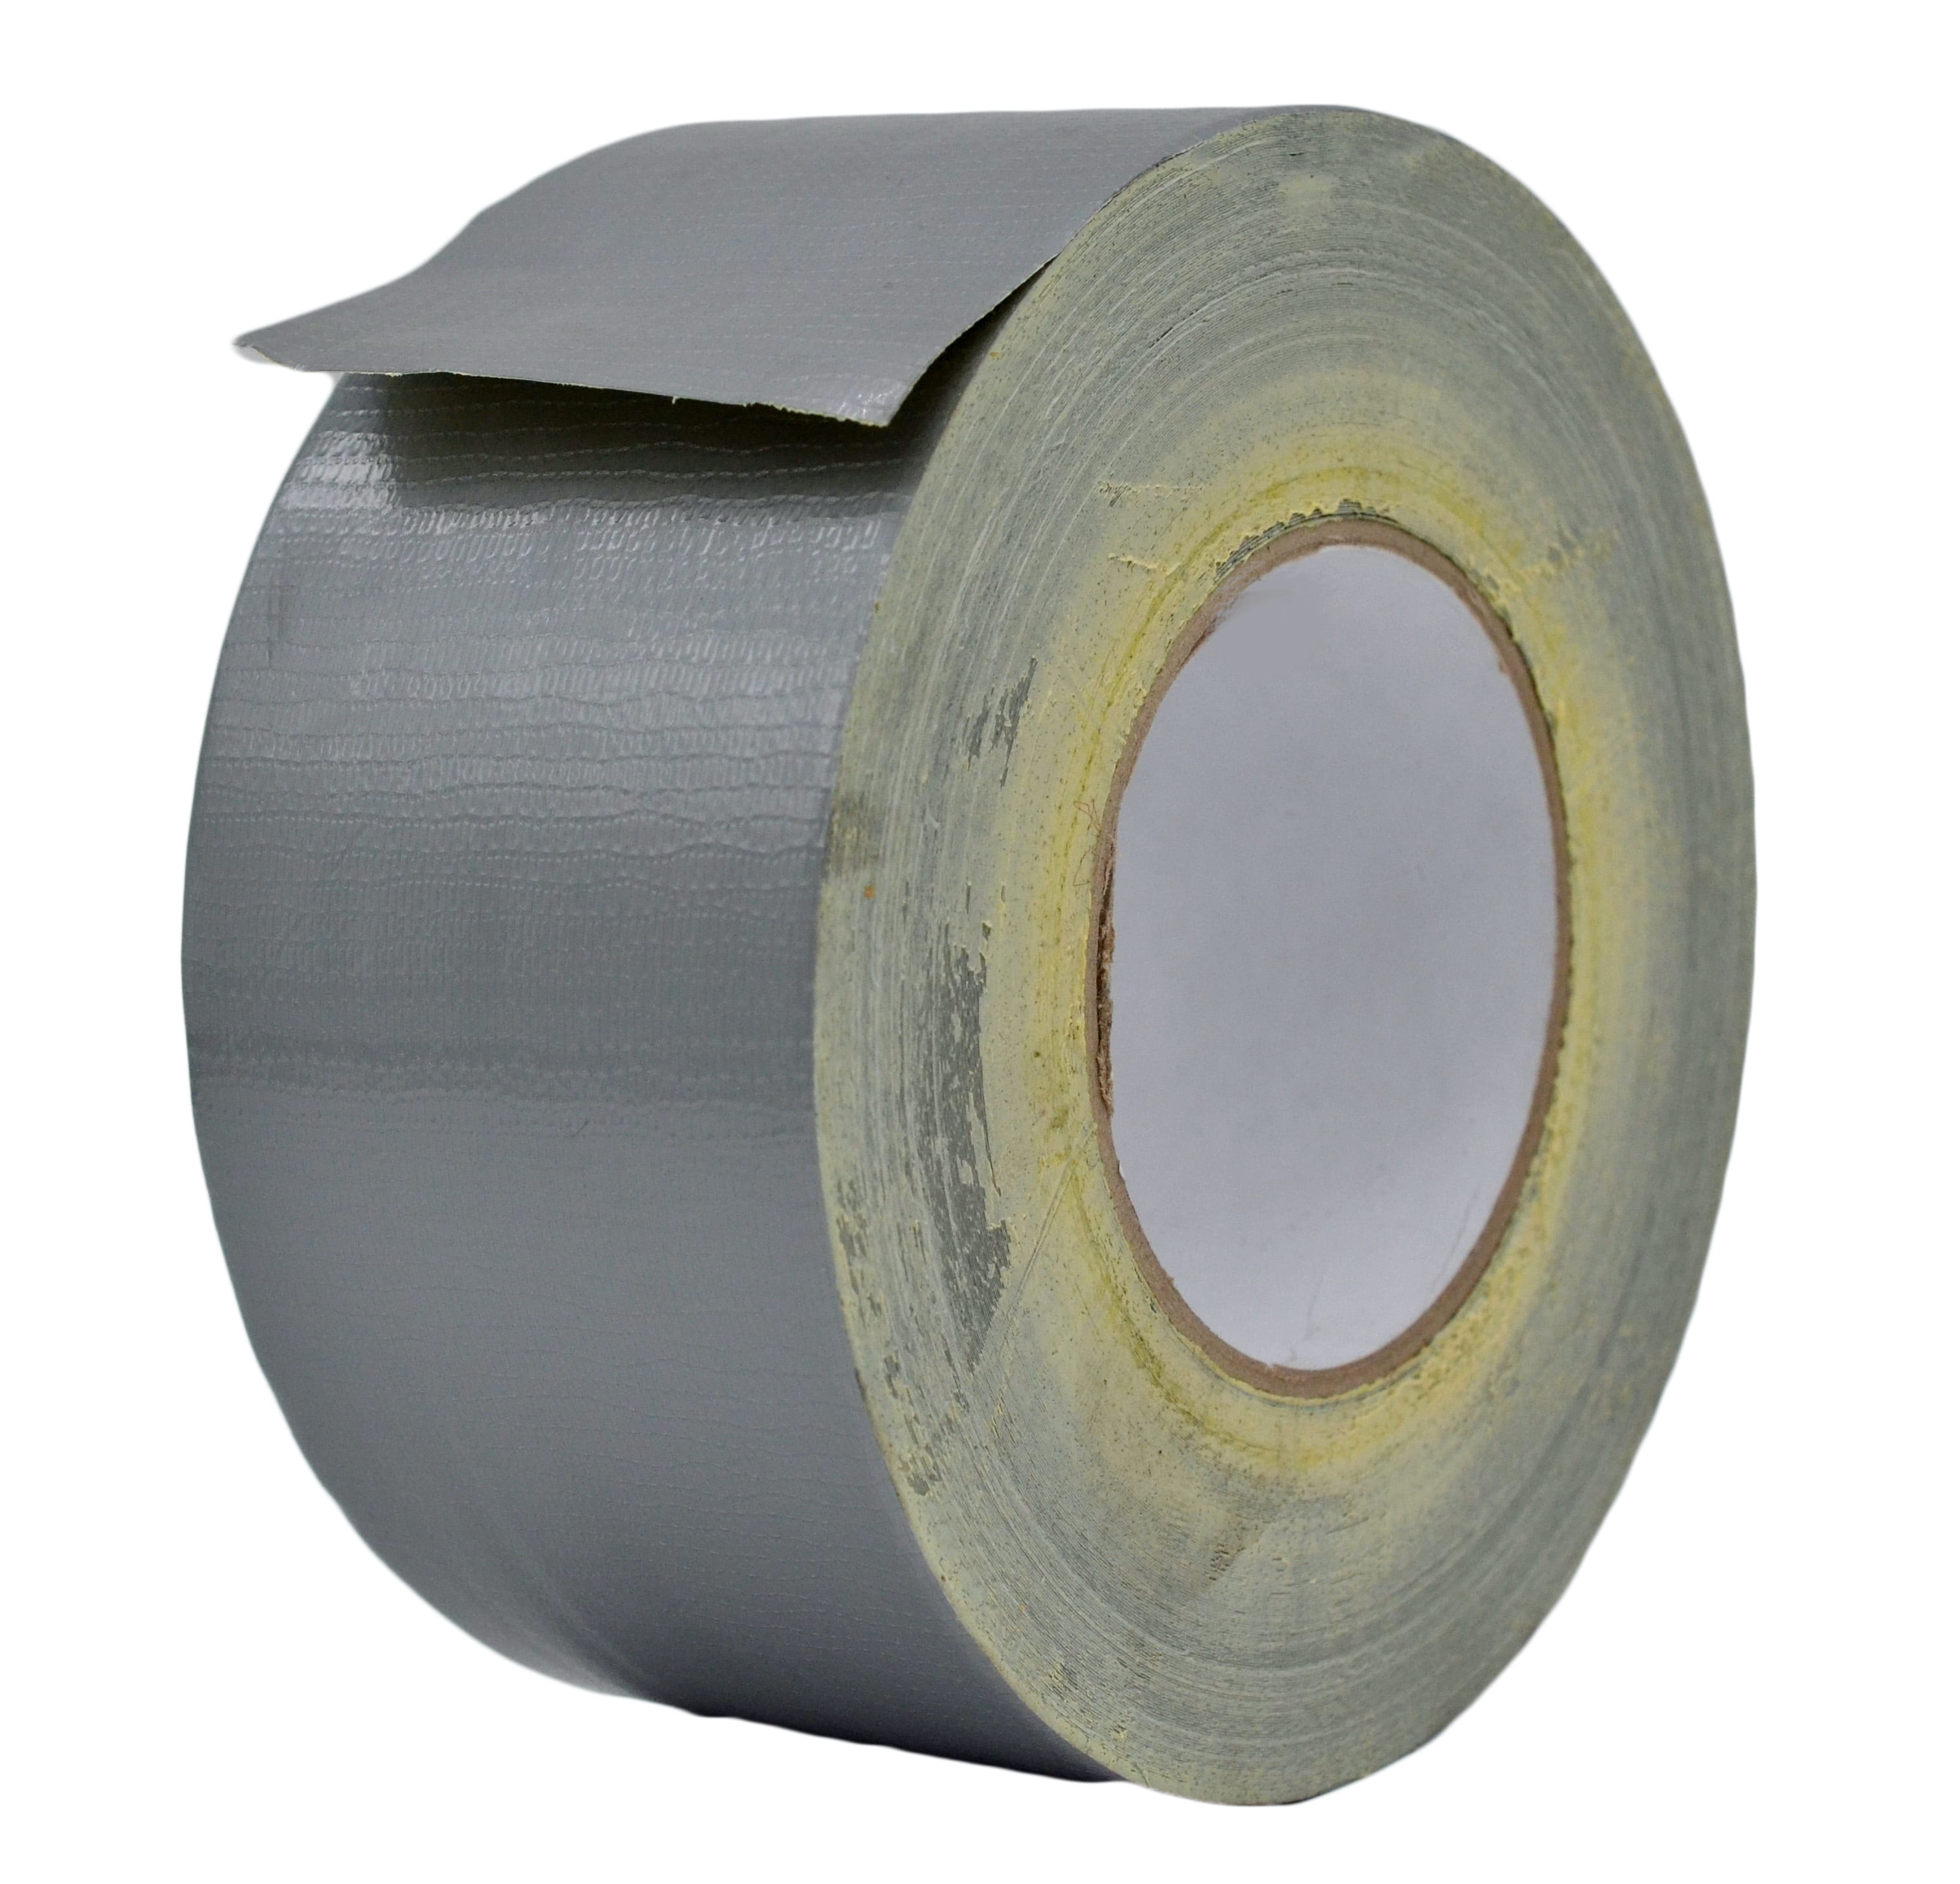 MAT Tape Gray 2.83 in. x 60 yd. Colored Duct Tape, 1 Roll